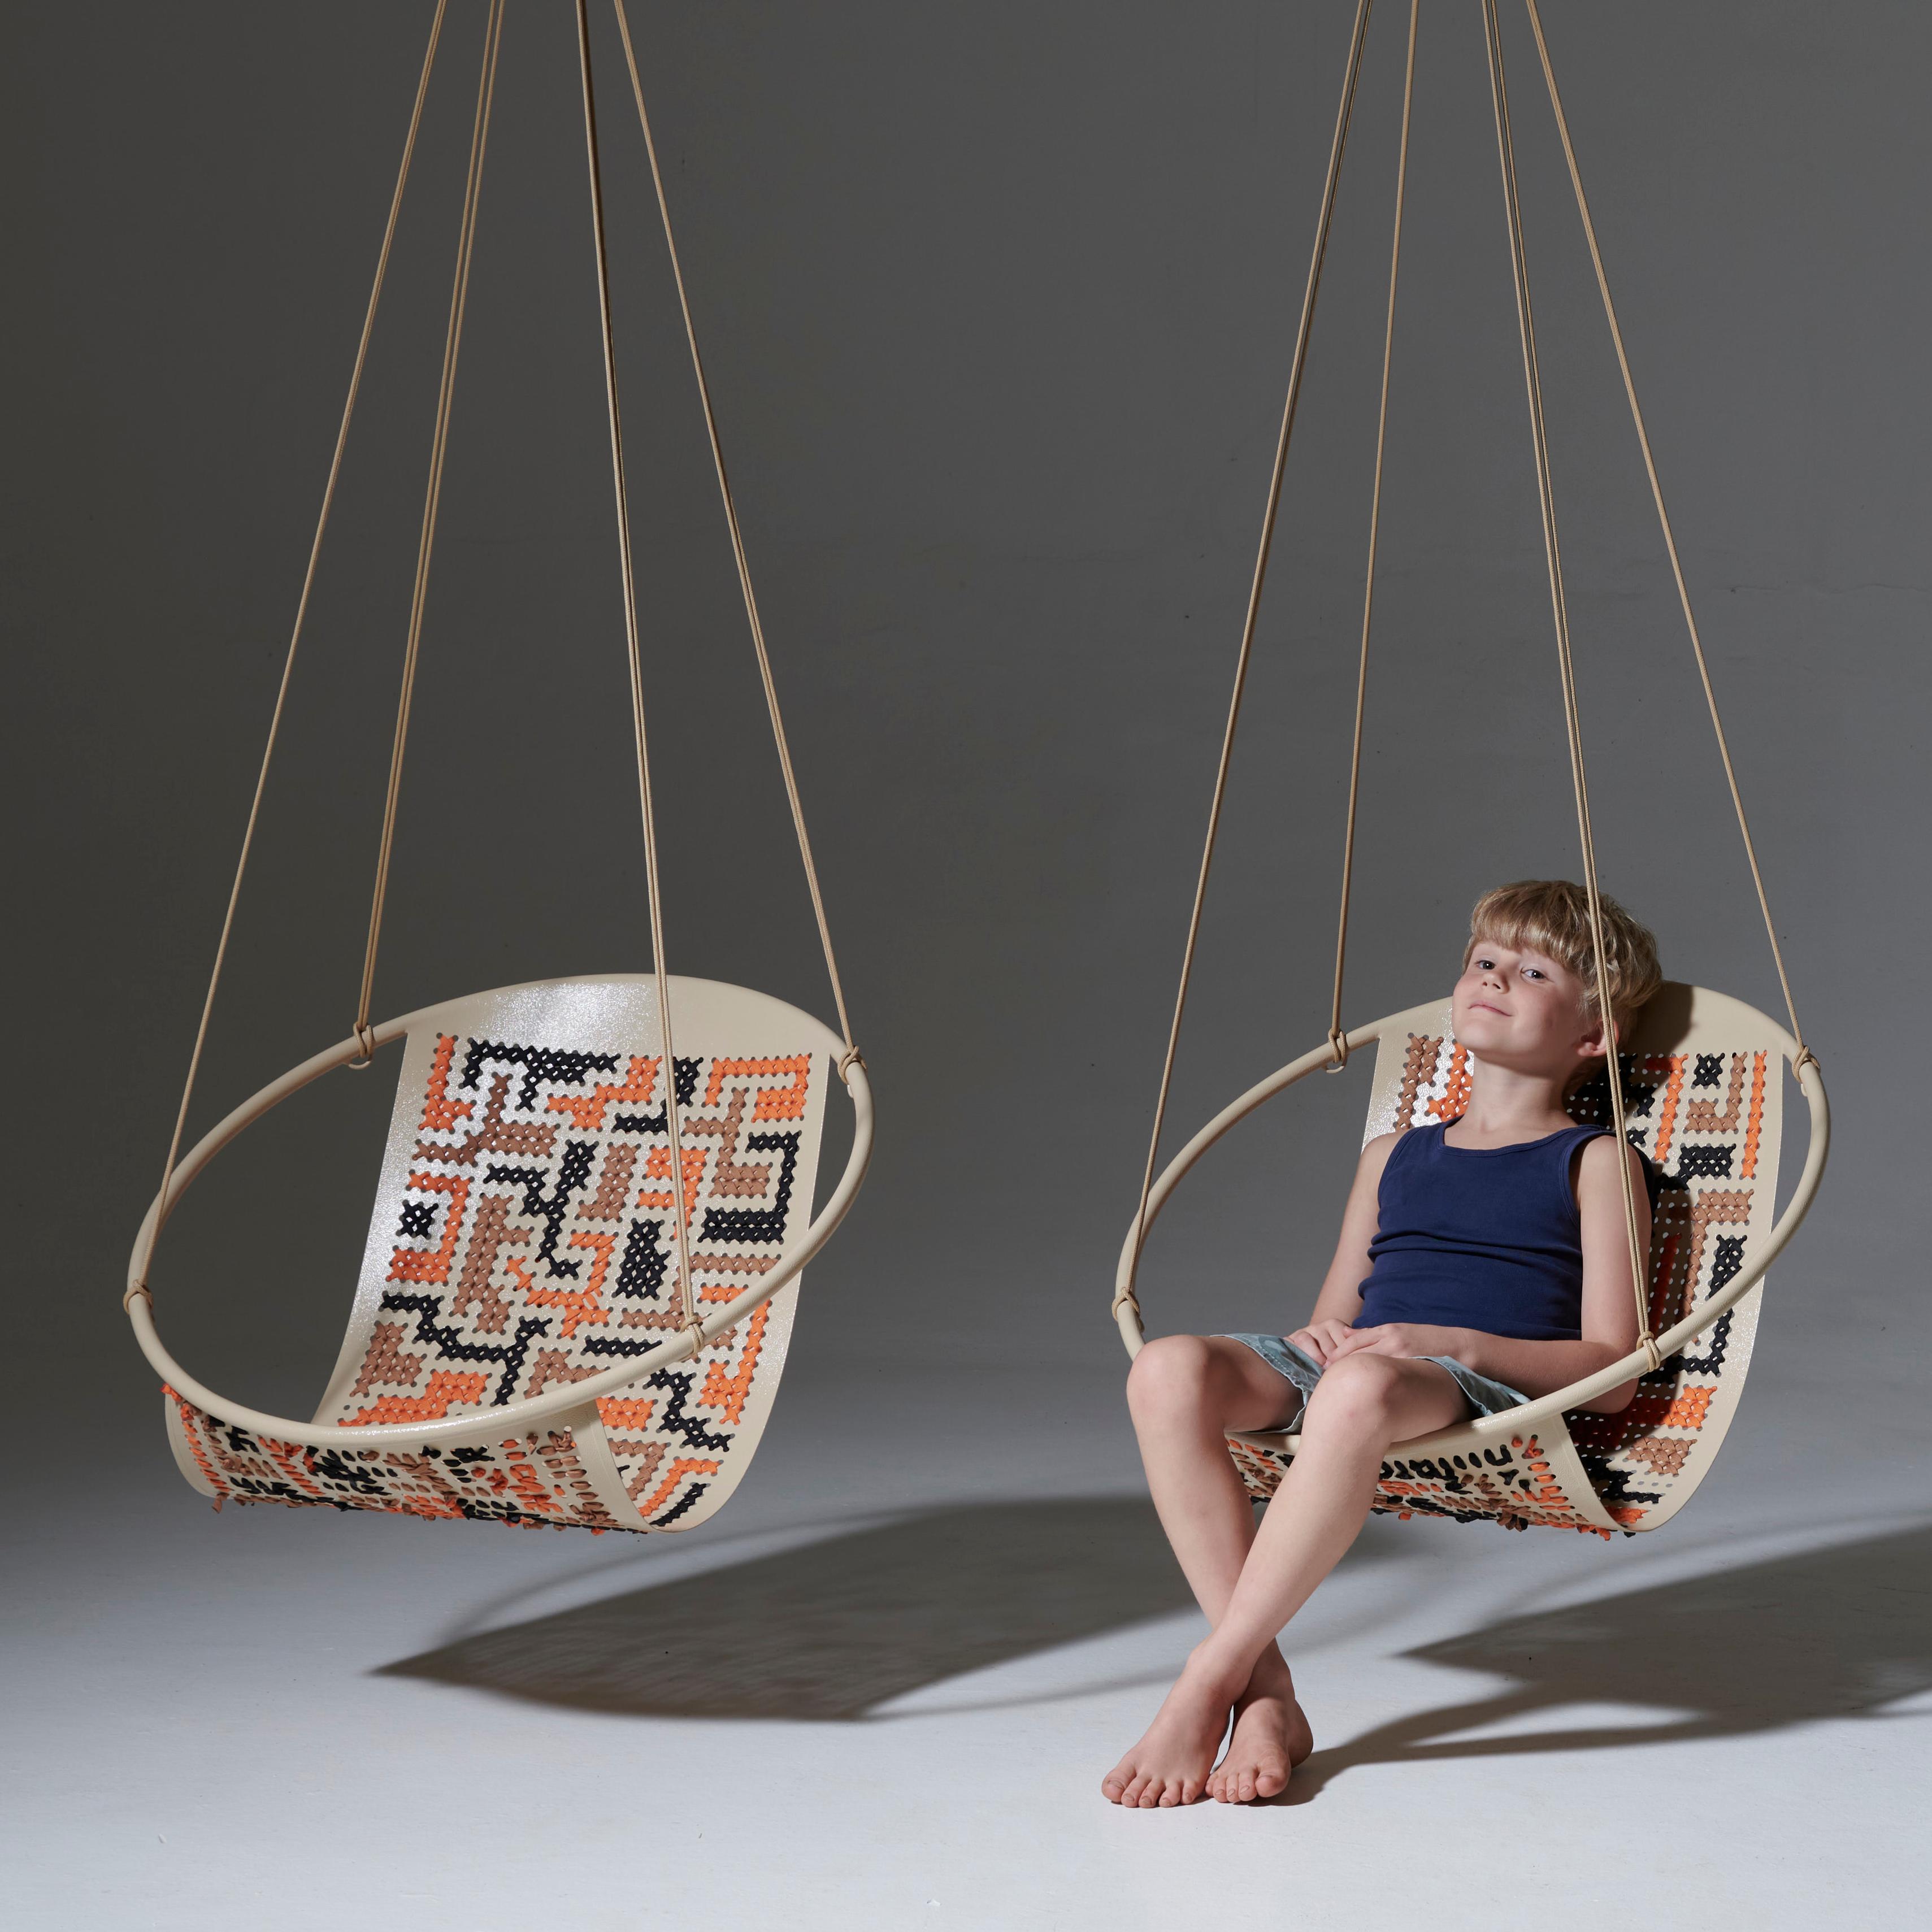 The Embroidery cross stitch hanging chair swing seat is ideal for ‘chilling’ in and just hanging out. 

Embroider a personalised cross stitch pattern from one of the many we give you or design your own. You can also use wording and copy lines of